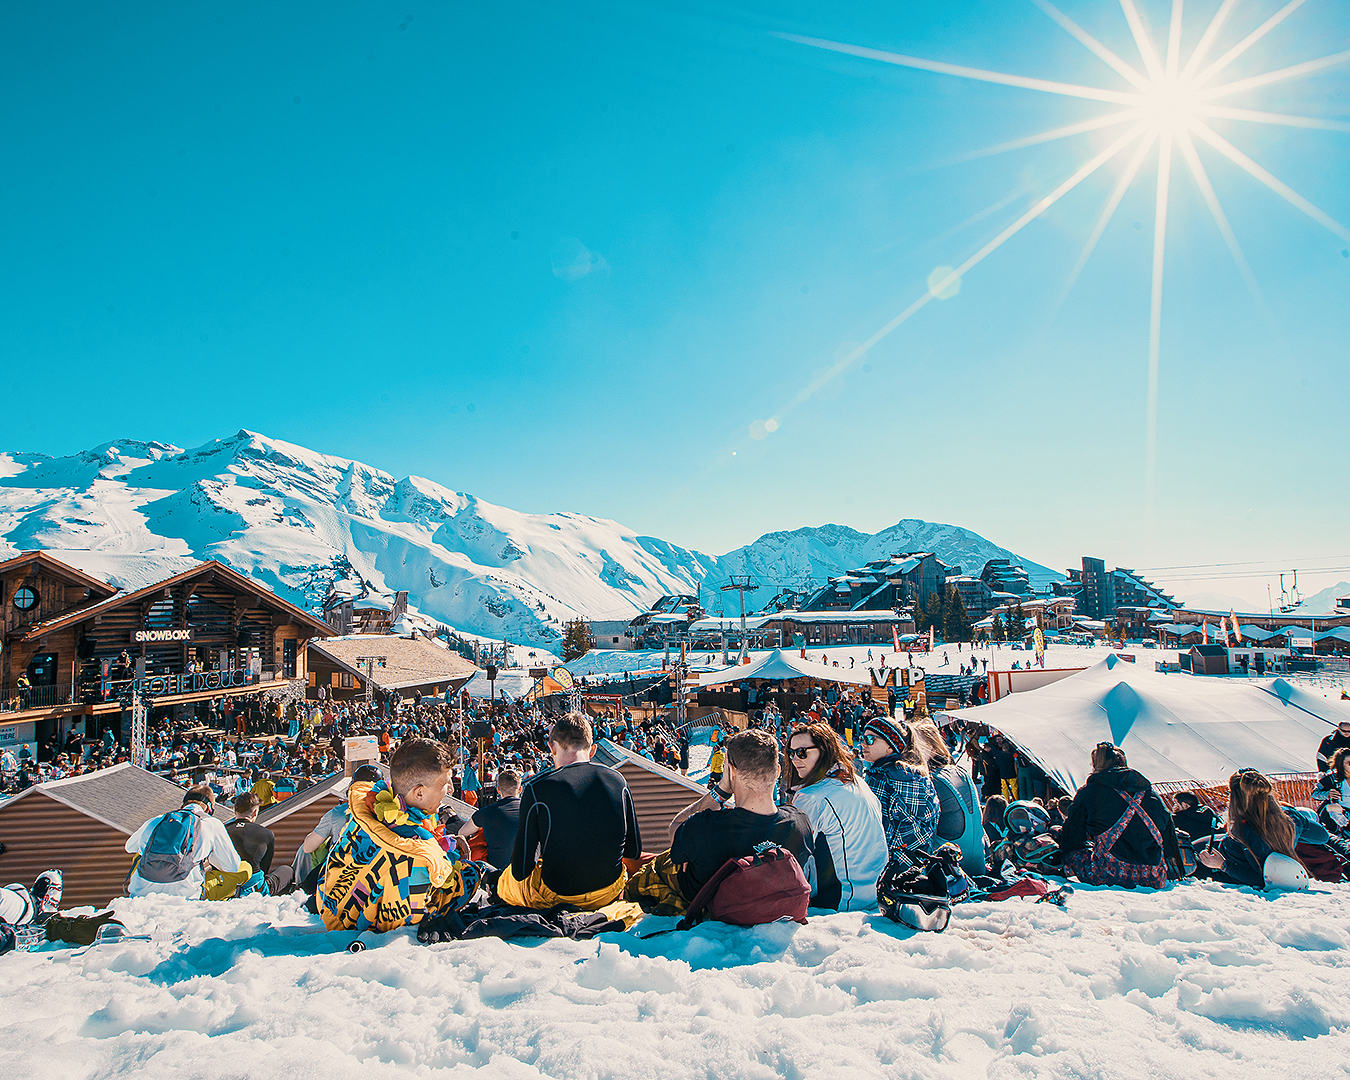 Partygoers take five on the beautiful slopes at Treble Cone.